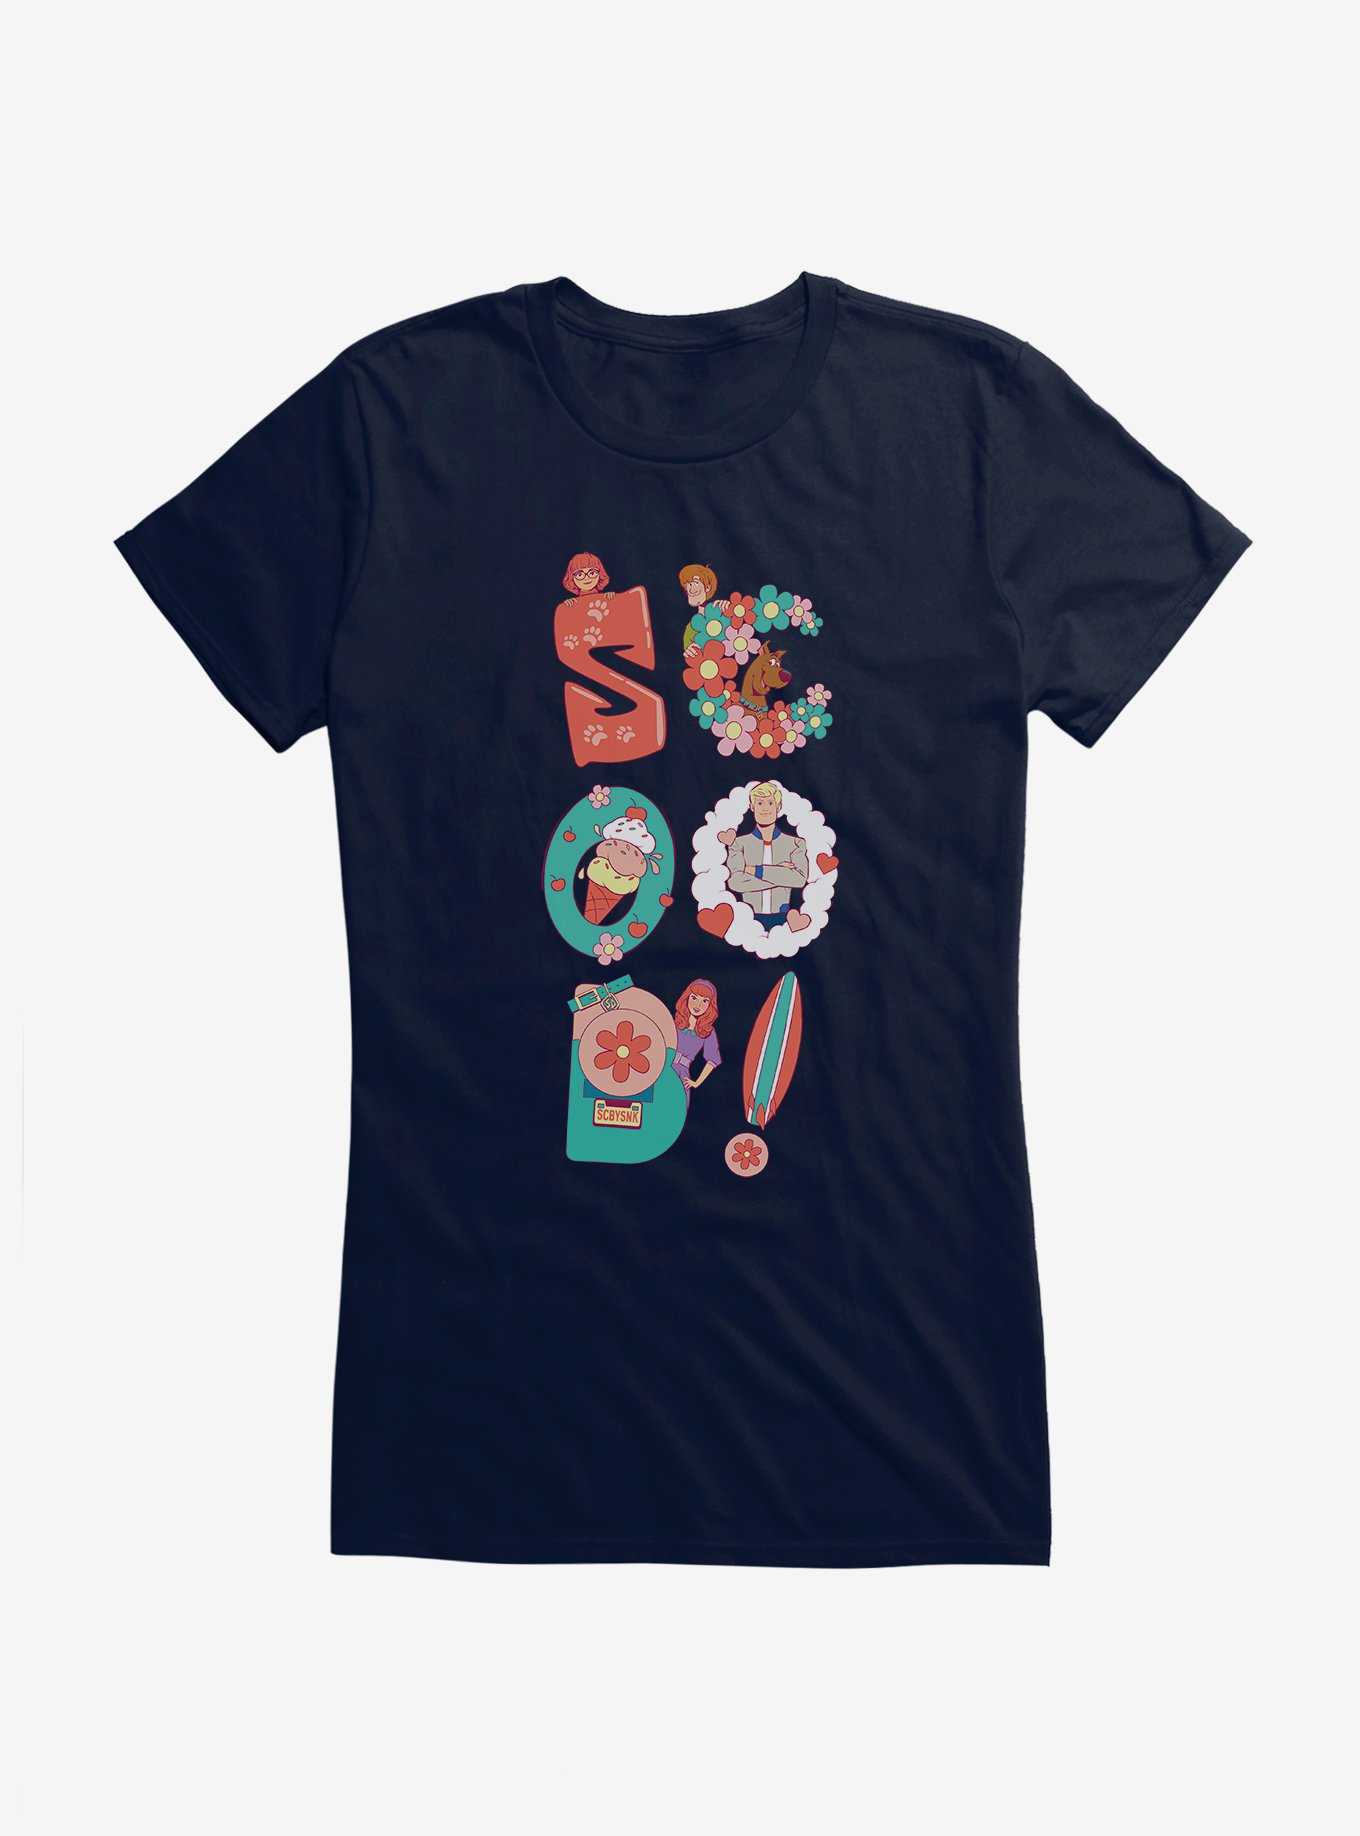 Scoob! All Of Scooby's Favorite Things Girls T-Shirt, , hi-res